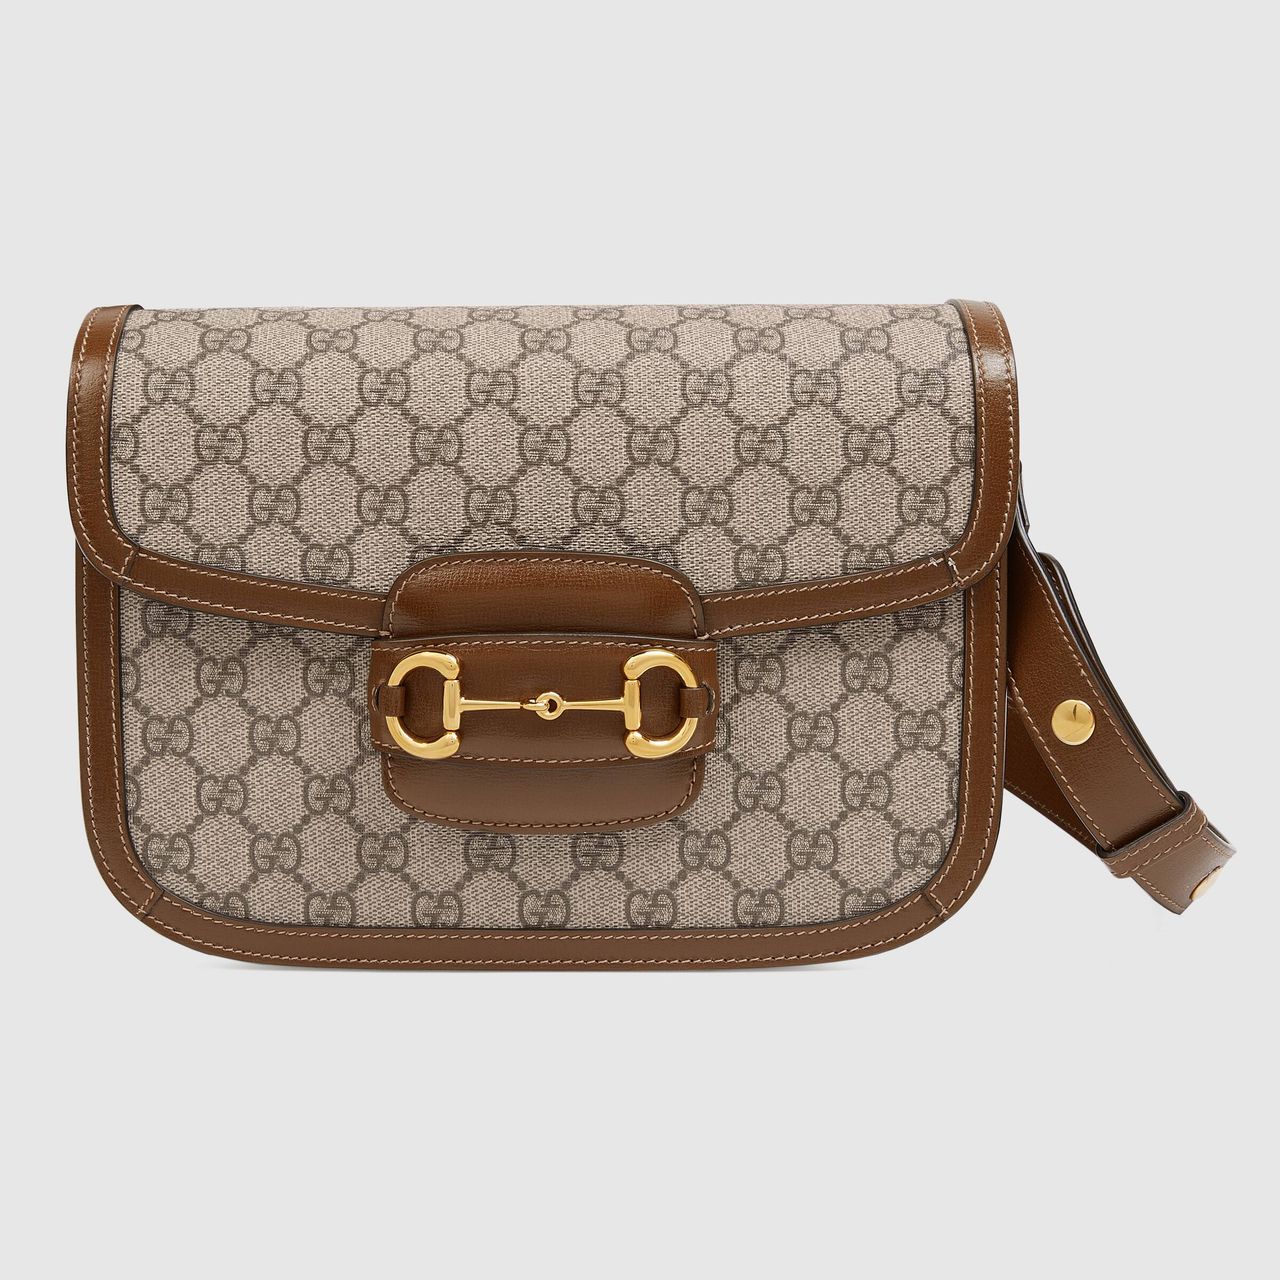 Gucci's 1955 Horsebit Bag Is the Latest Designer It Bag | Who What Wear